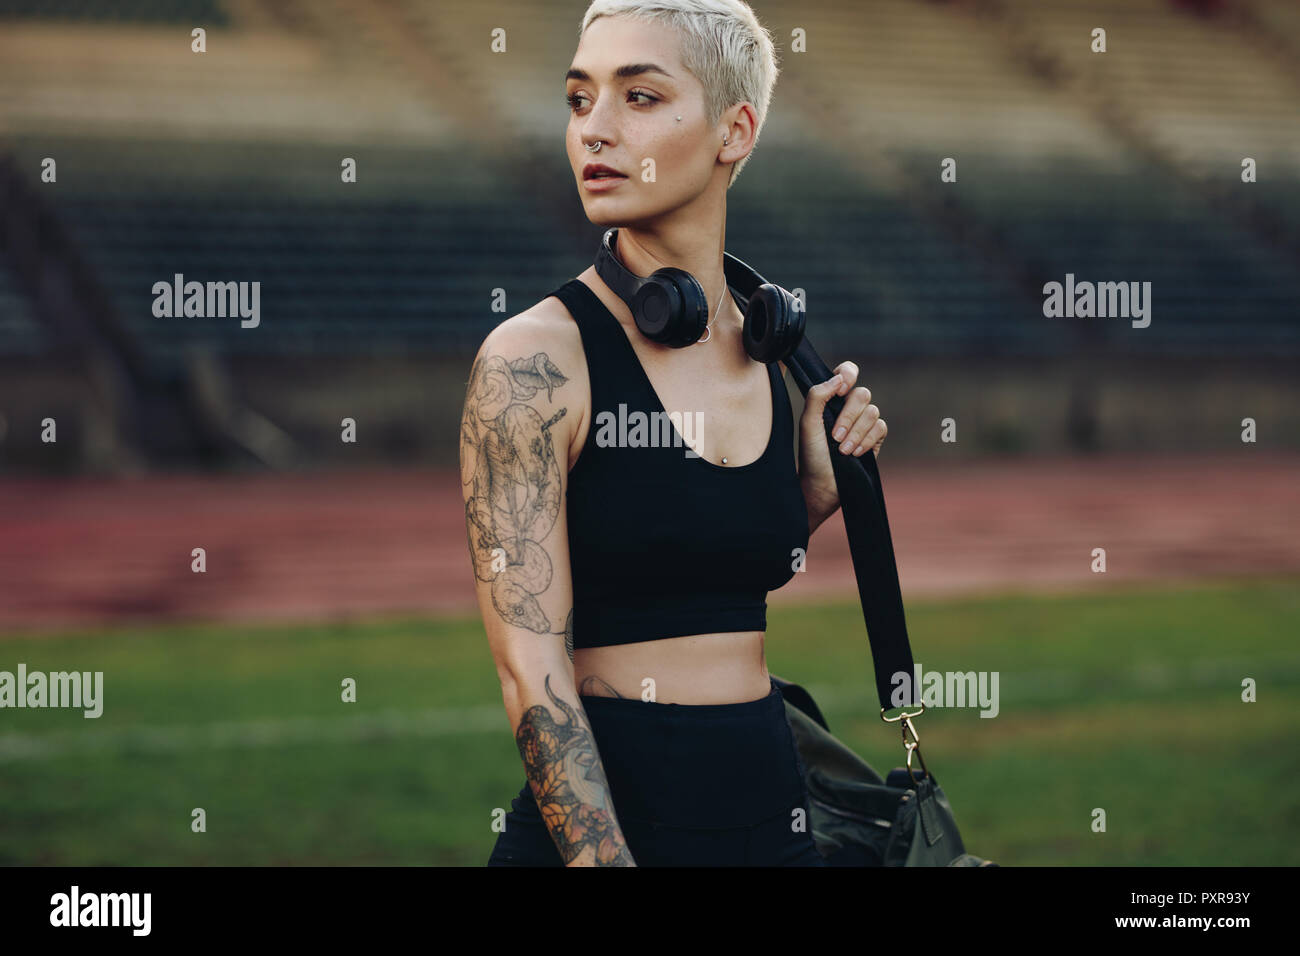 Female athlete walking in a track and field stadium carrying her gym bag. Woman in fitness wear with a wireless headphone on neck looking away. Stock Photo